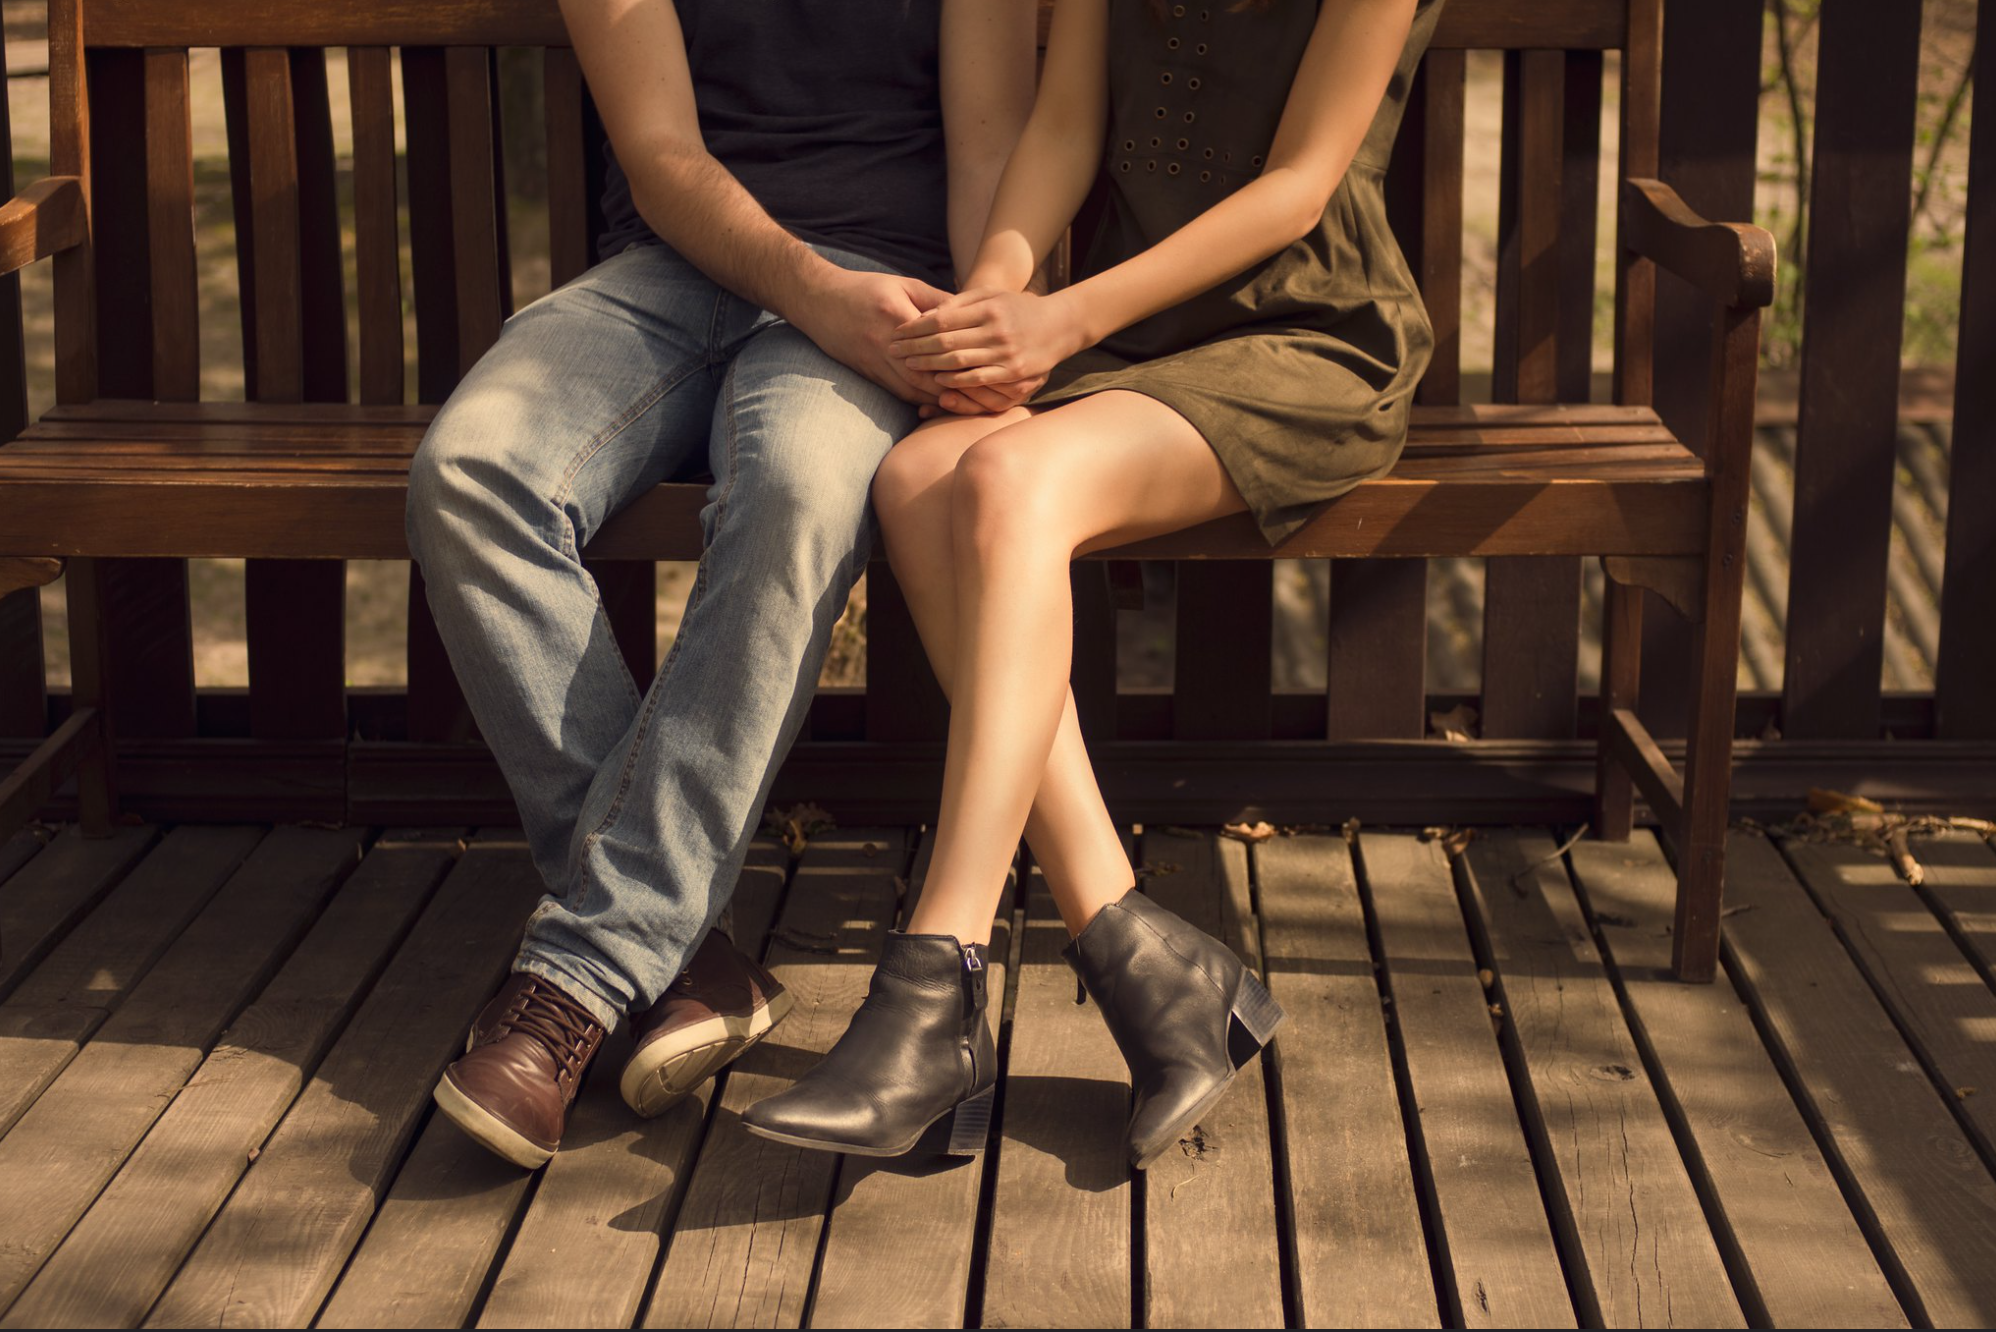 Young romantic couple sitting close on an outdoor bench, holding hands intimately; man wearing jeans, woman a short skirt.